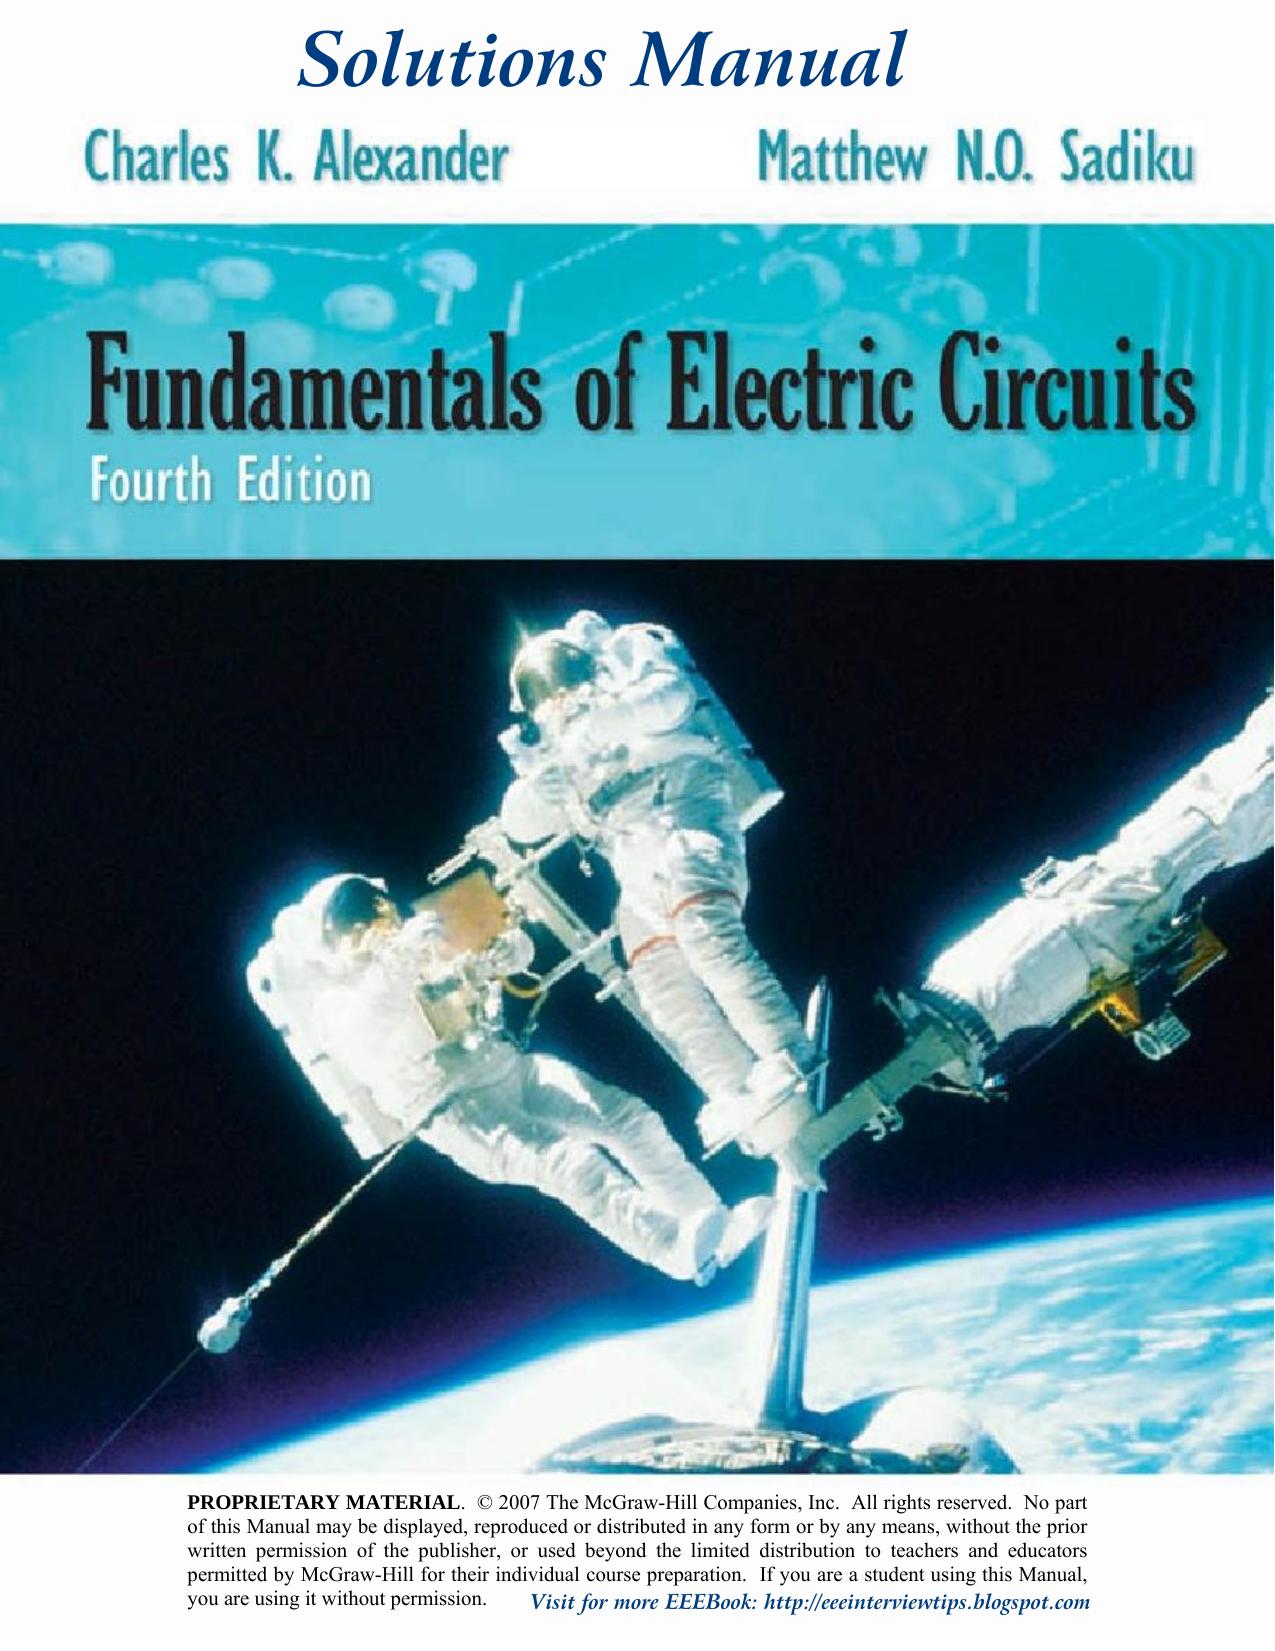 Solutions Manual of Fundamentals of electric circuits 4th ed. 2007.pdf